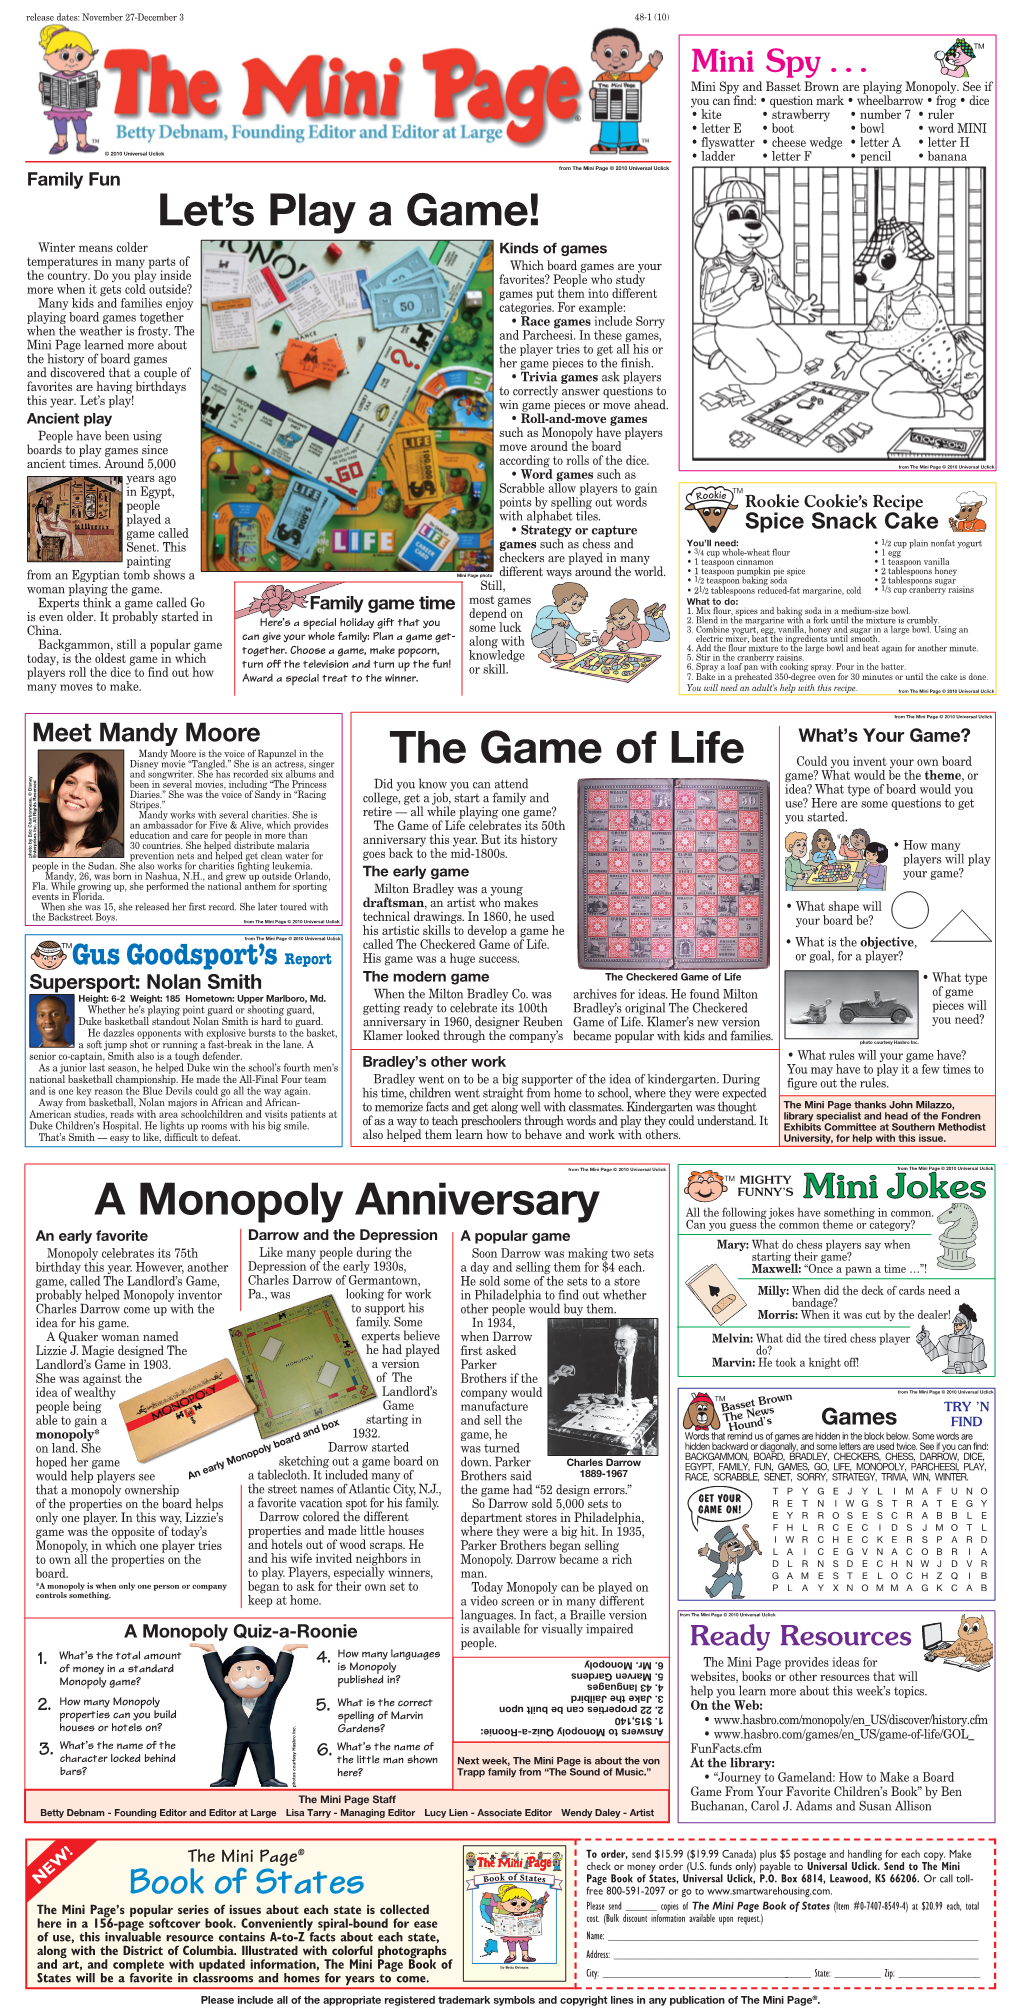 Let's Play a Game! the Game of Life a Monopoly Anniversary